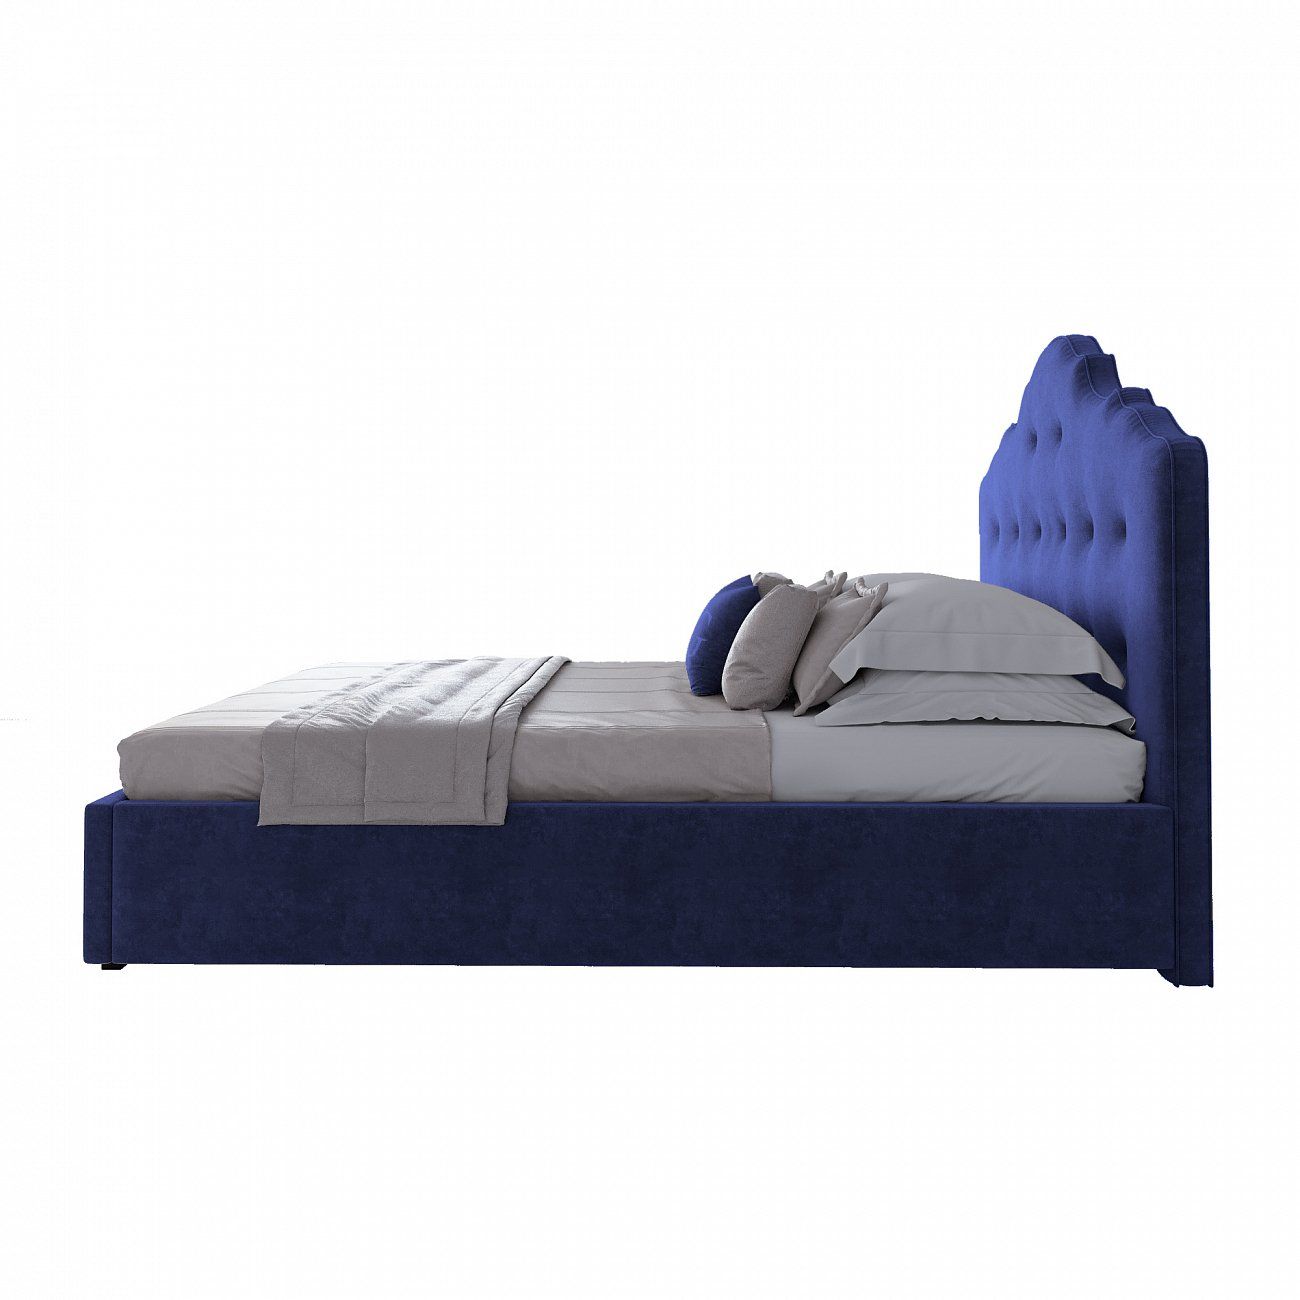 Double bed 160x200 blue Palace